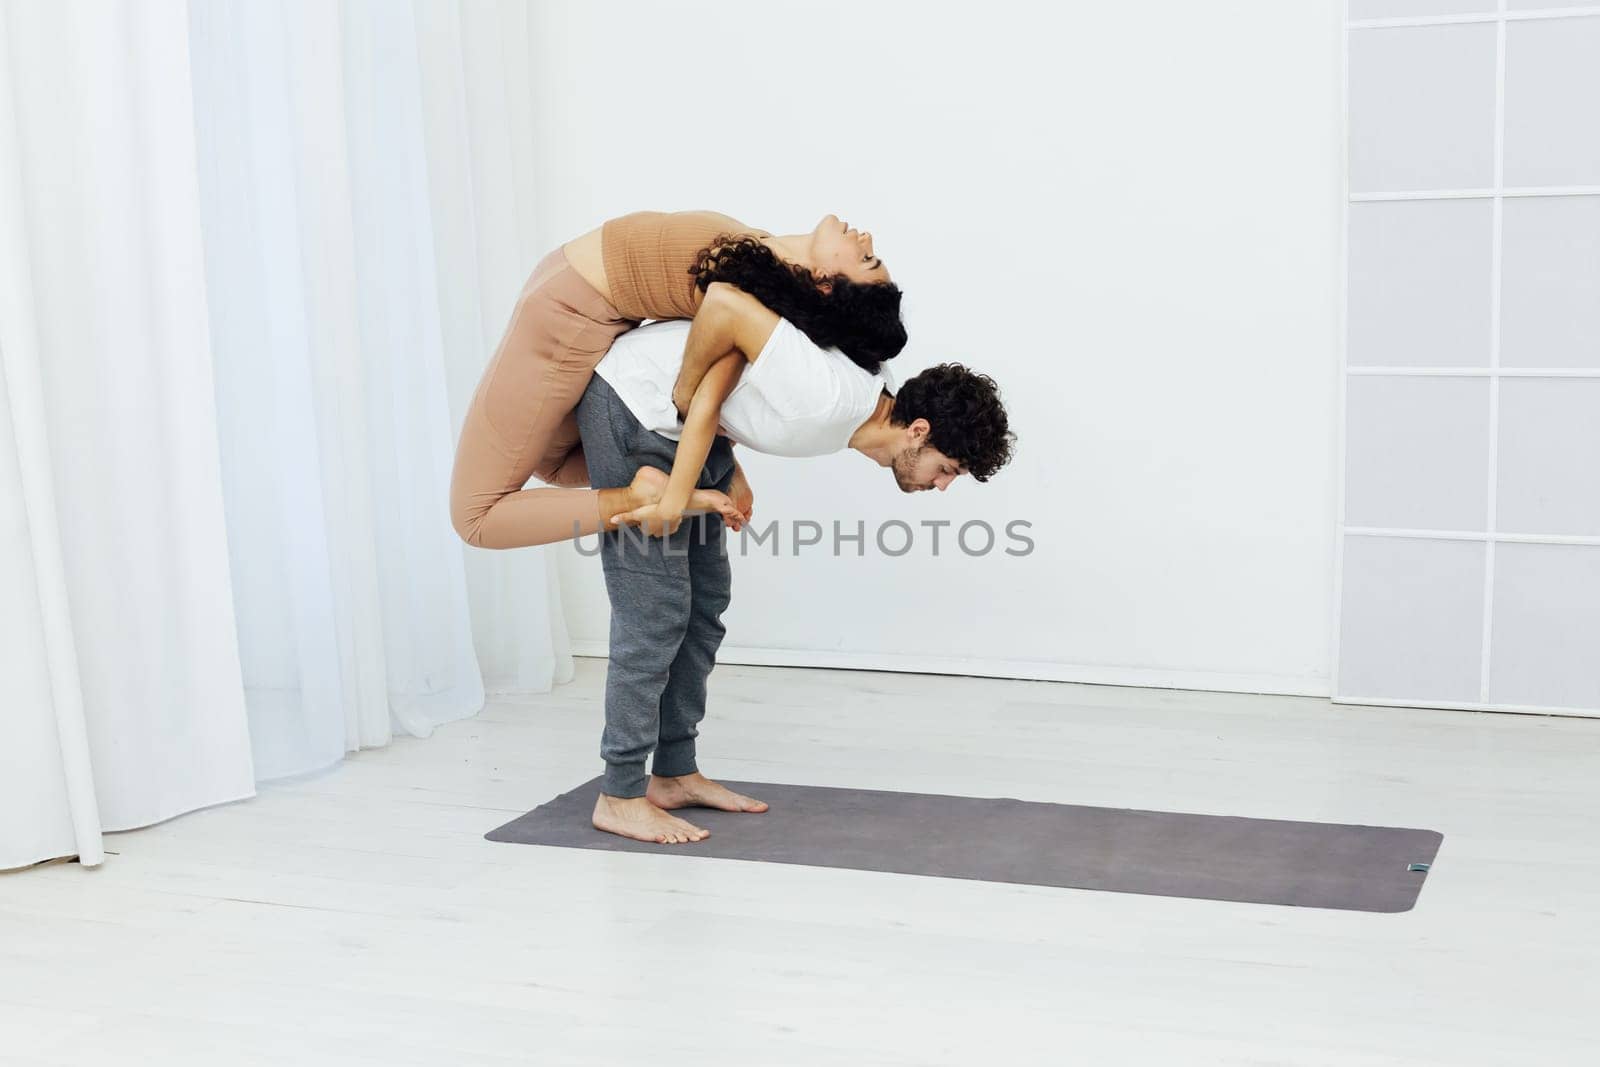 Yoga group concept. Young couple meditating together, sitting back to back on windows background